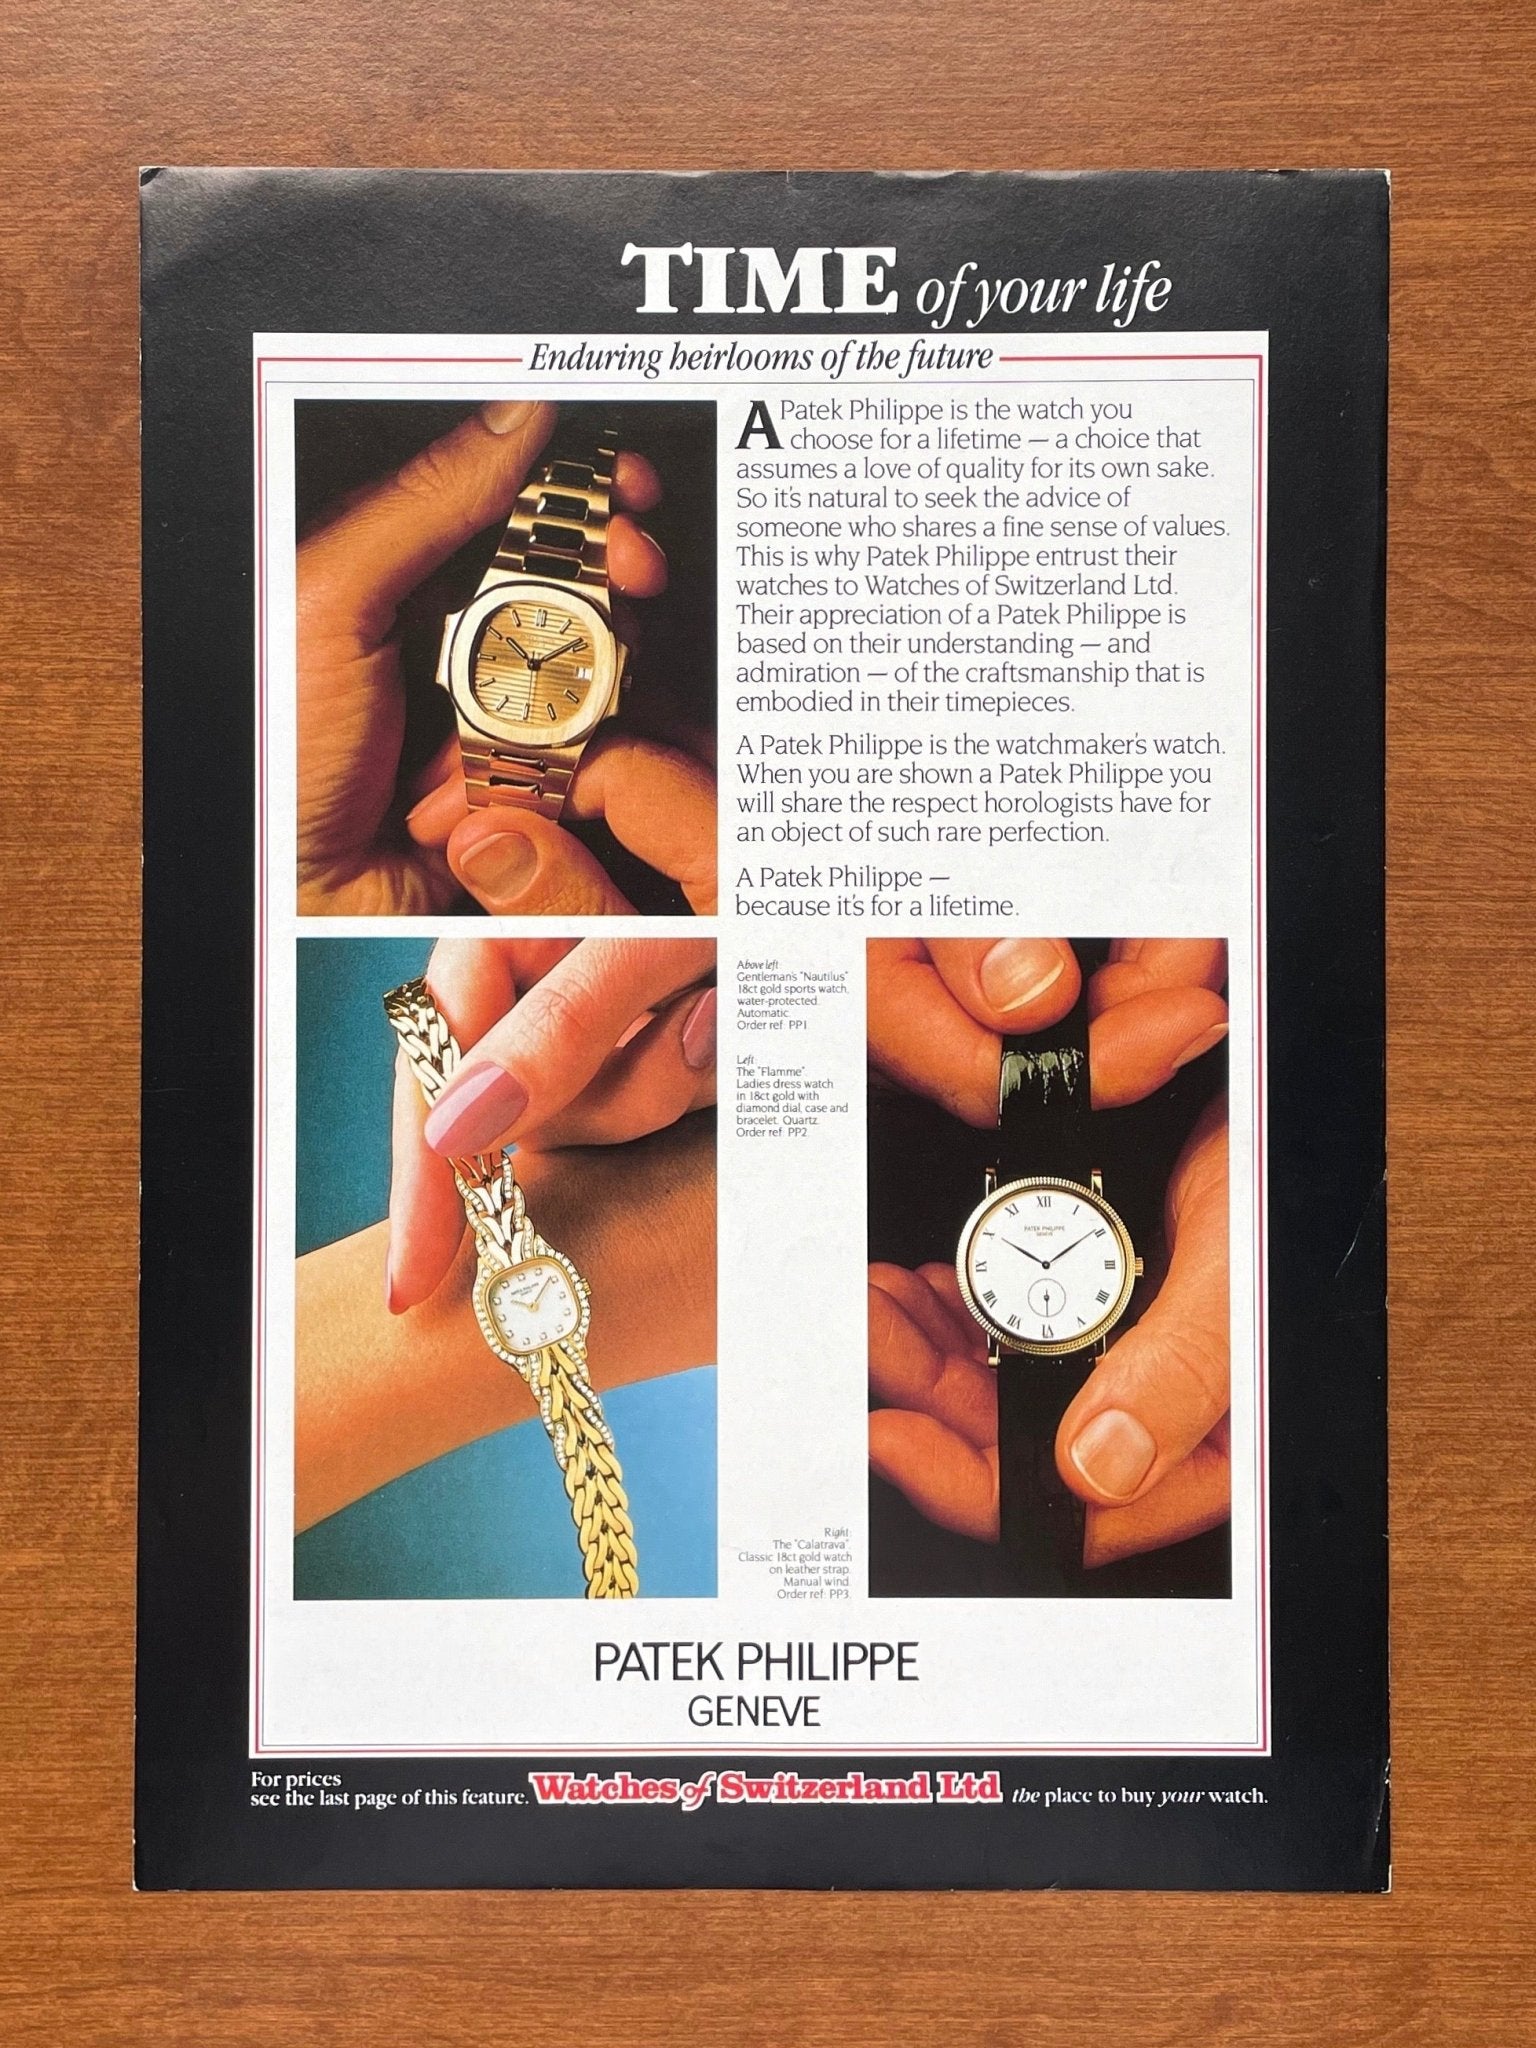 1984 Patek Philippe "TIME of your life" Advertisement